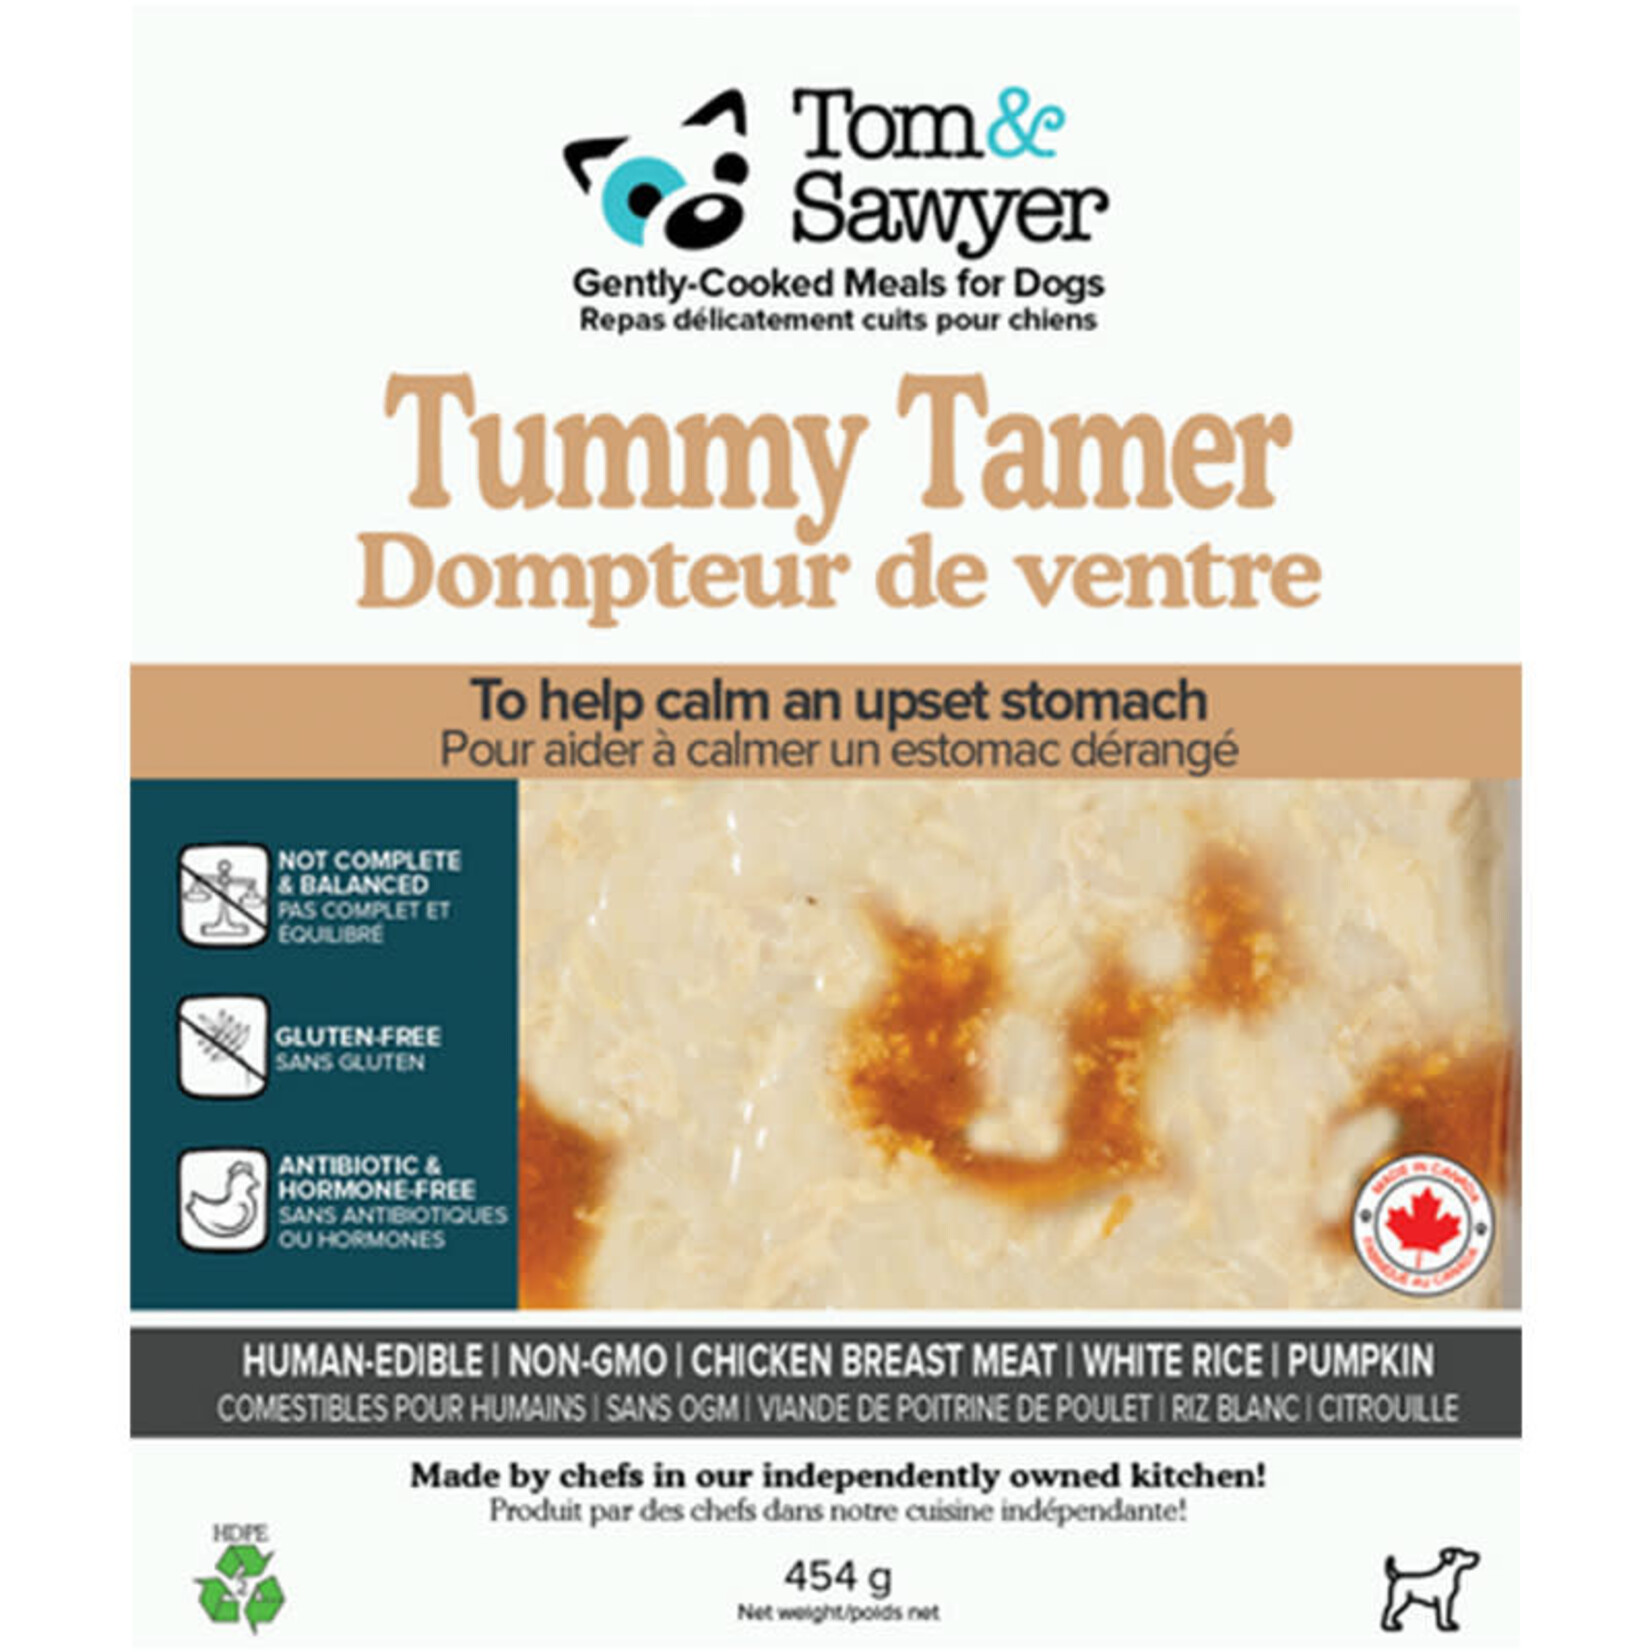 Tom & Sawyer - Gently Cooked - Tummy Tamer - 1lb